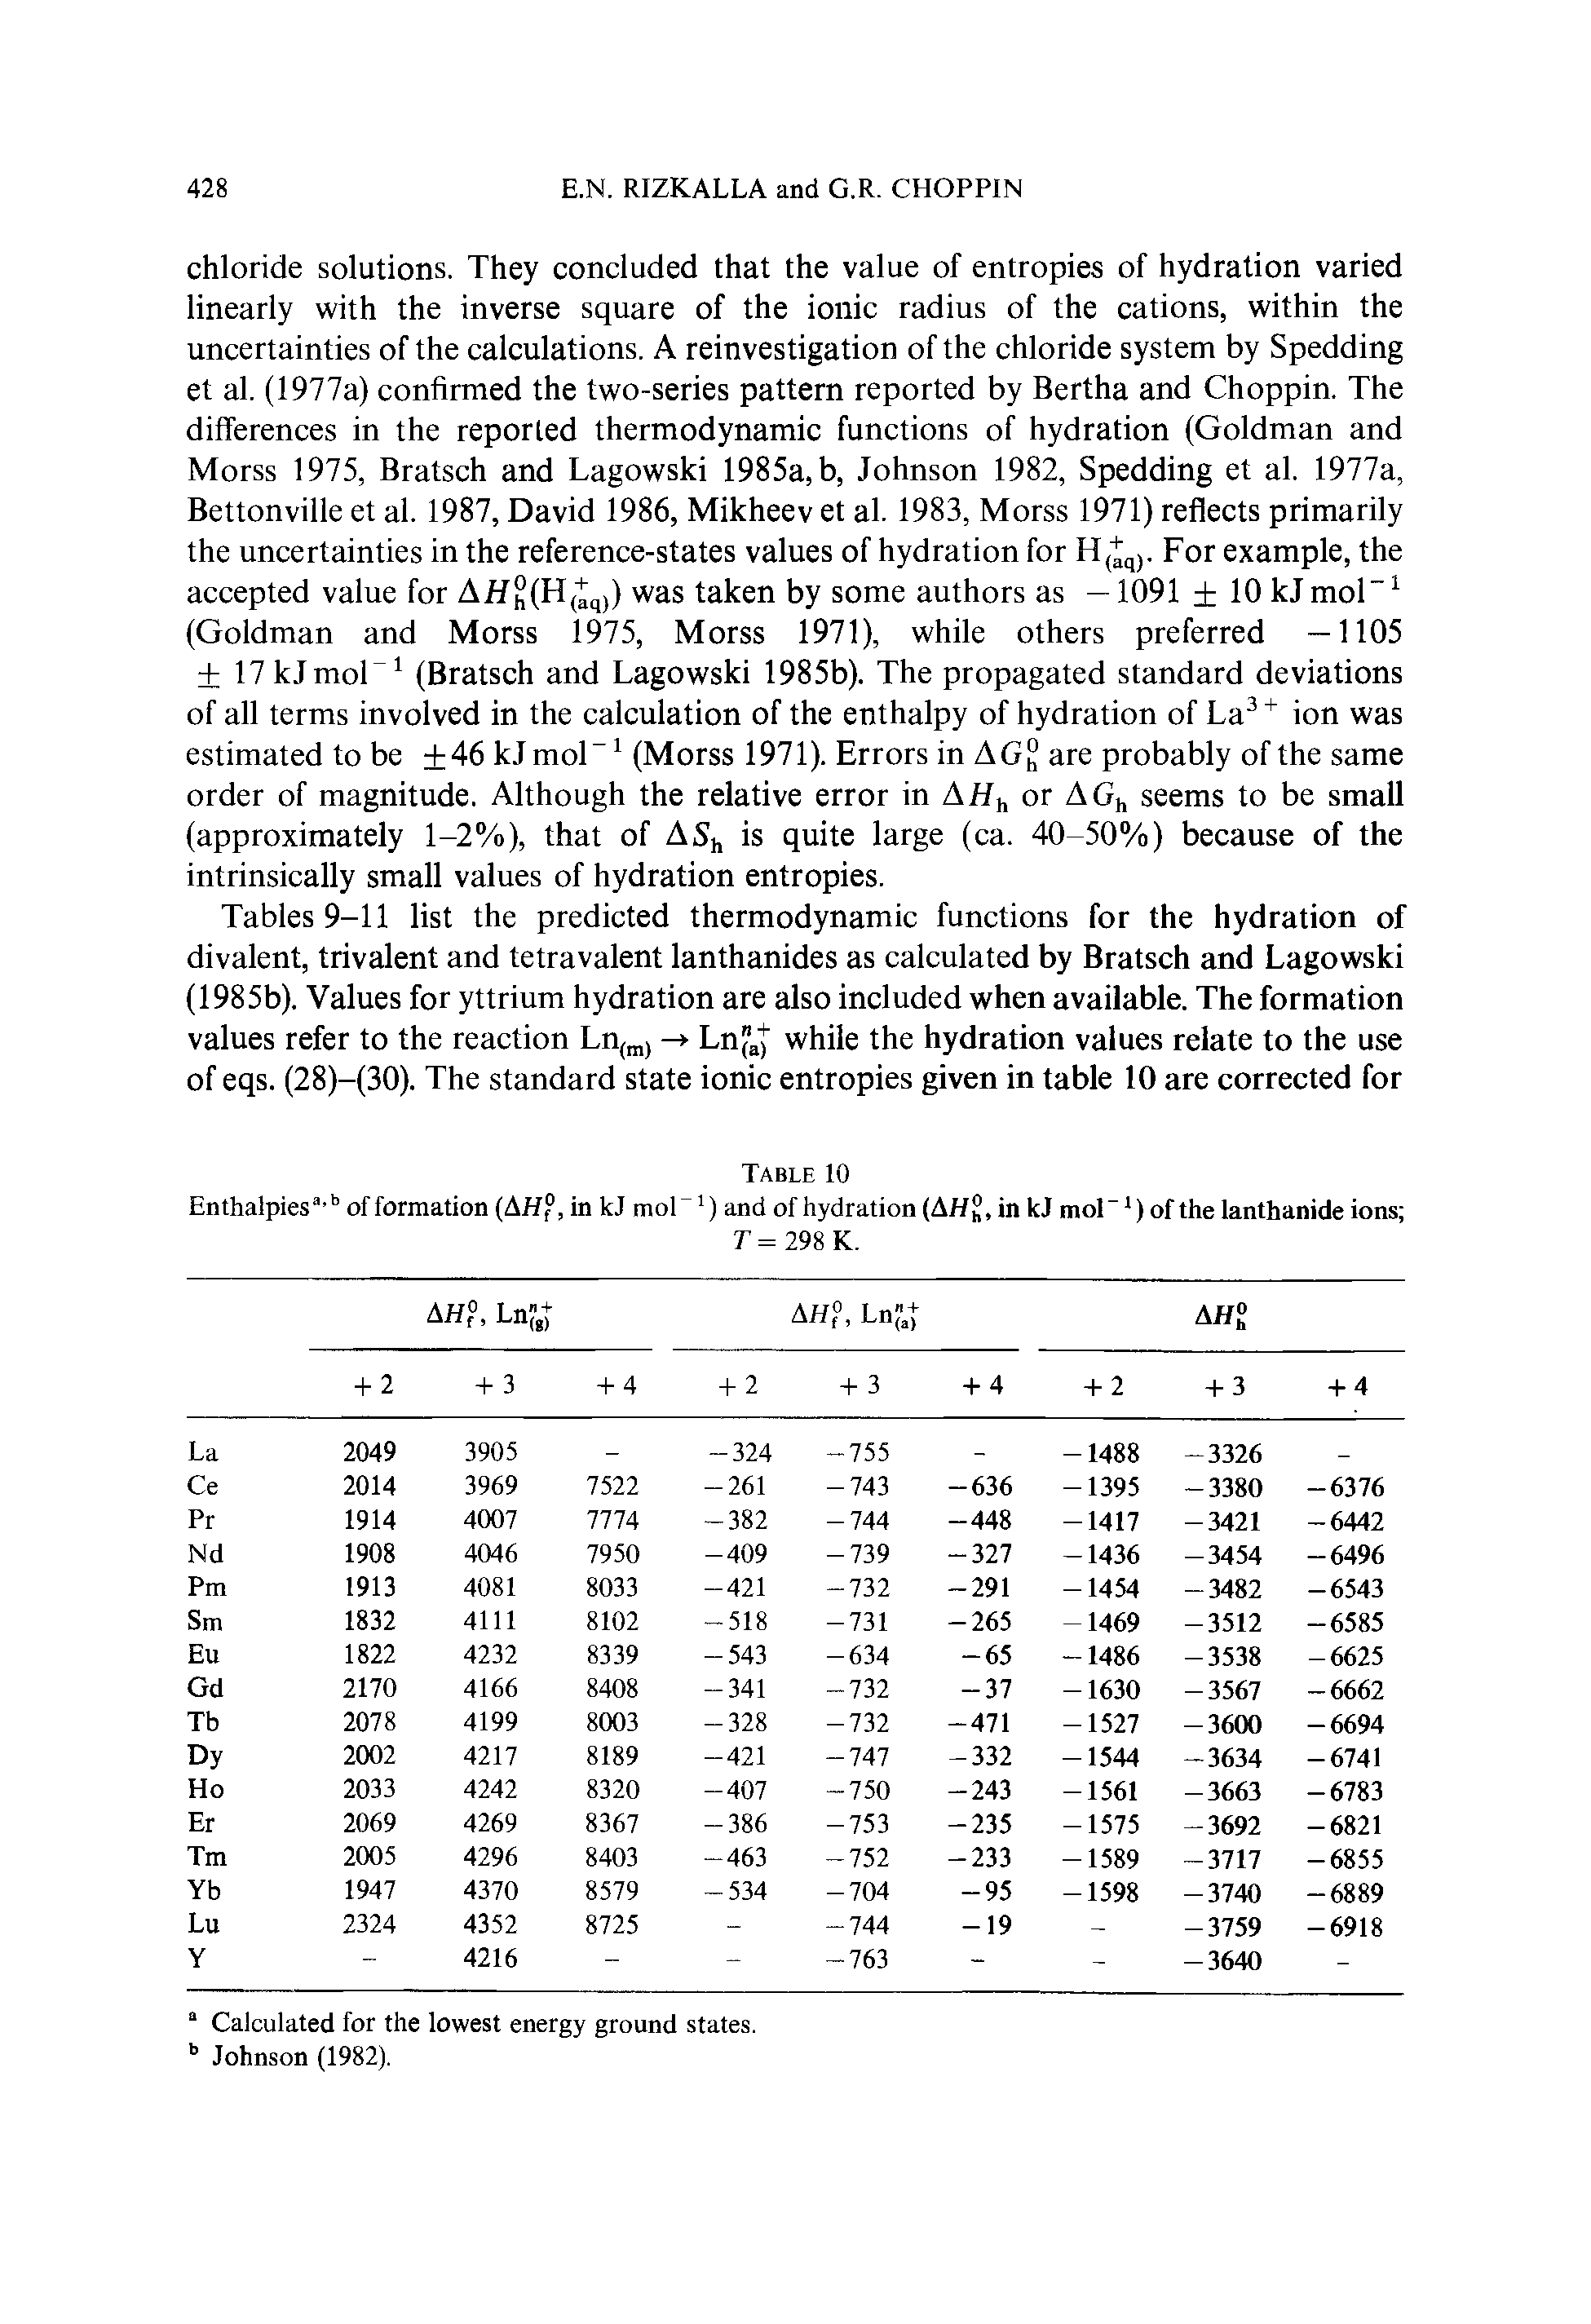 Tables 9-11 list the predicted thermodynamic functions for the hydration of divalent, trivalent and tetravalent lanthanides as calculated by Bratsch and Lagowski (1985b). Values for yttrium hydration are also included when available. The formation values refer to the reaction Ln, Ln"a while the hydration values relate to the use of eqs. (28)-(30). The standard state ionic entropies given in table 10 are corrected for...